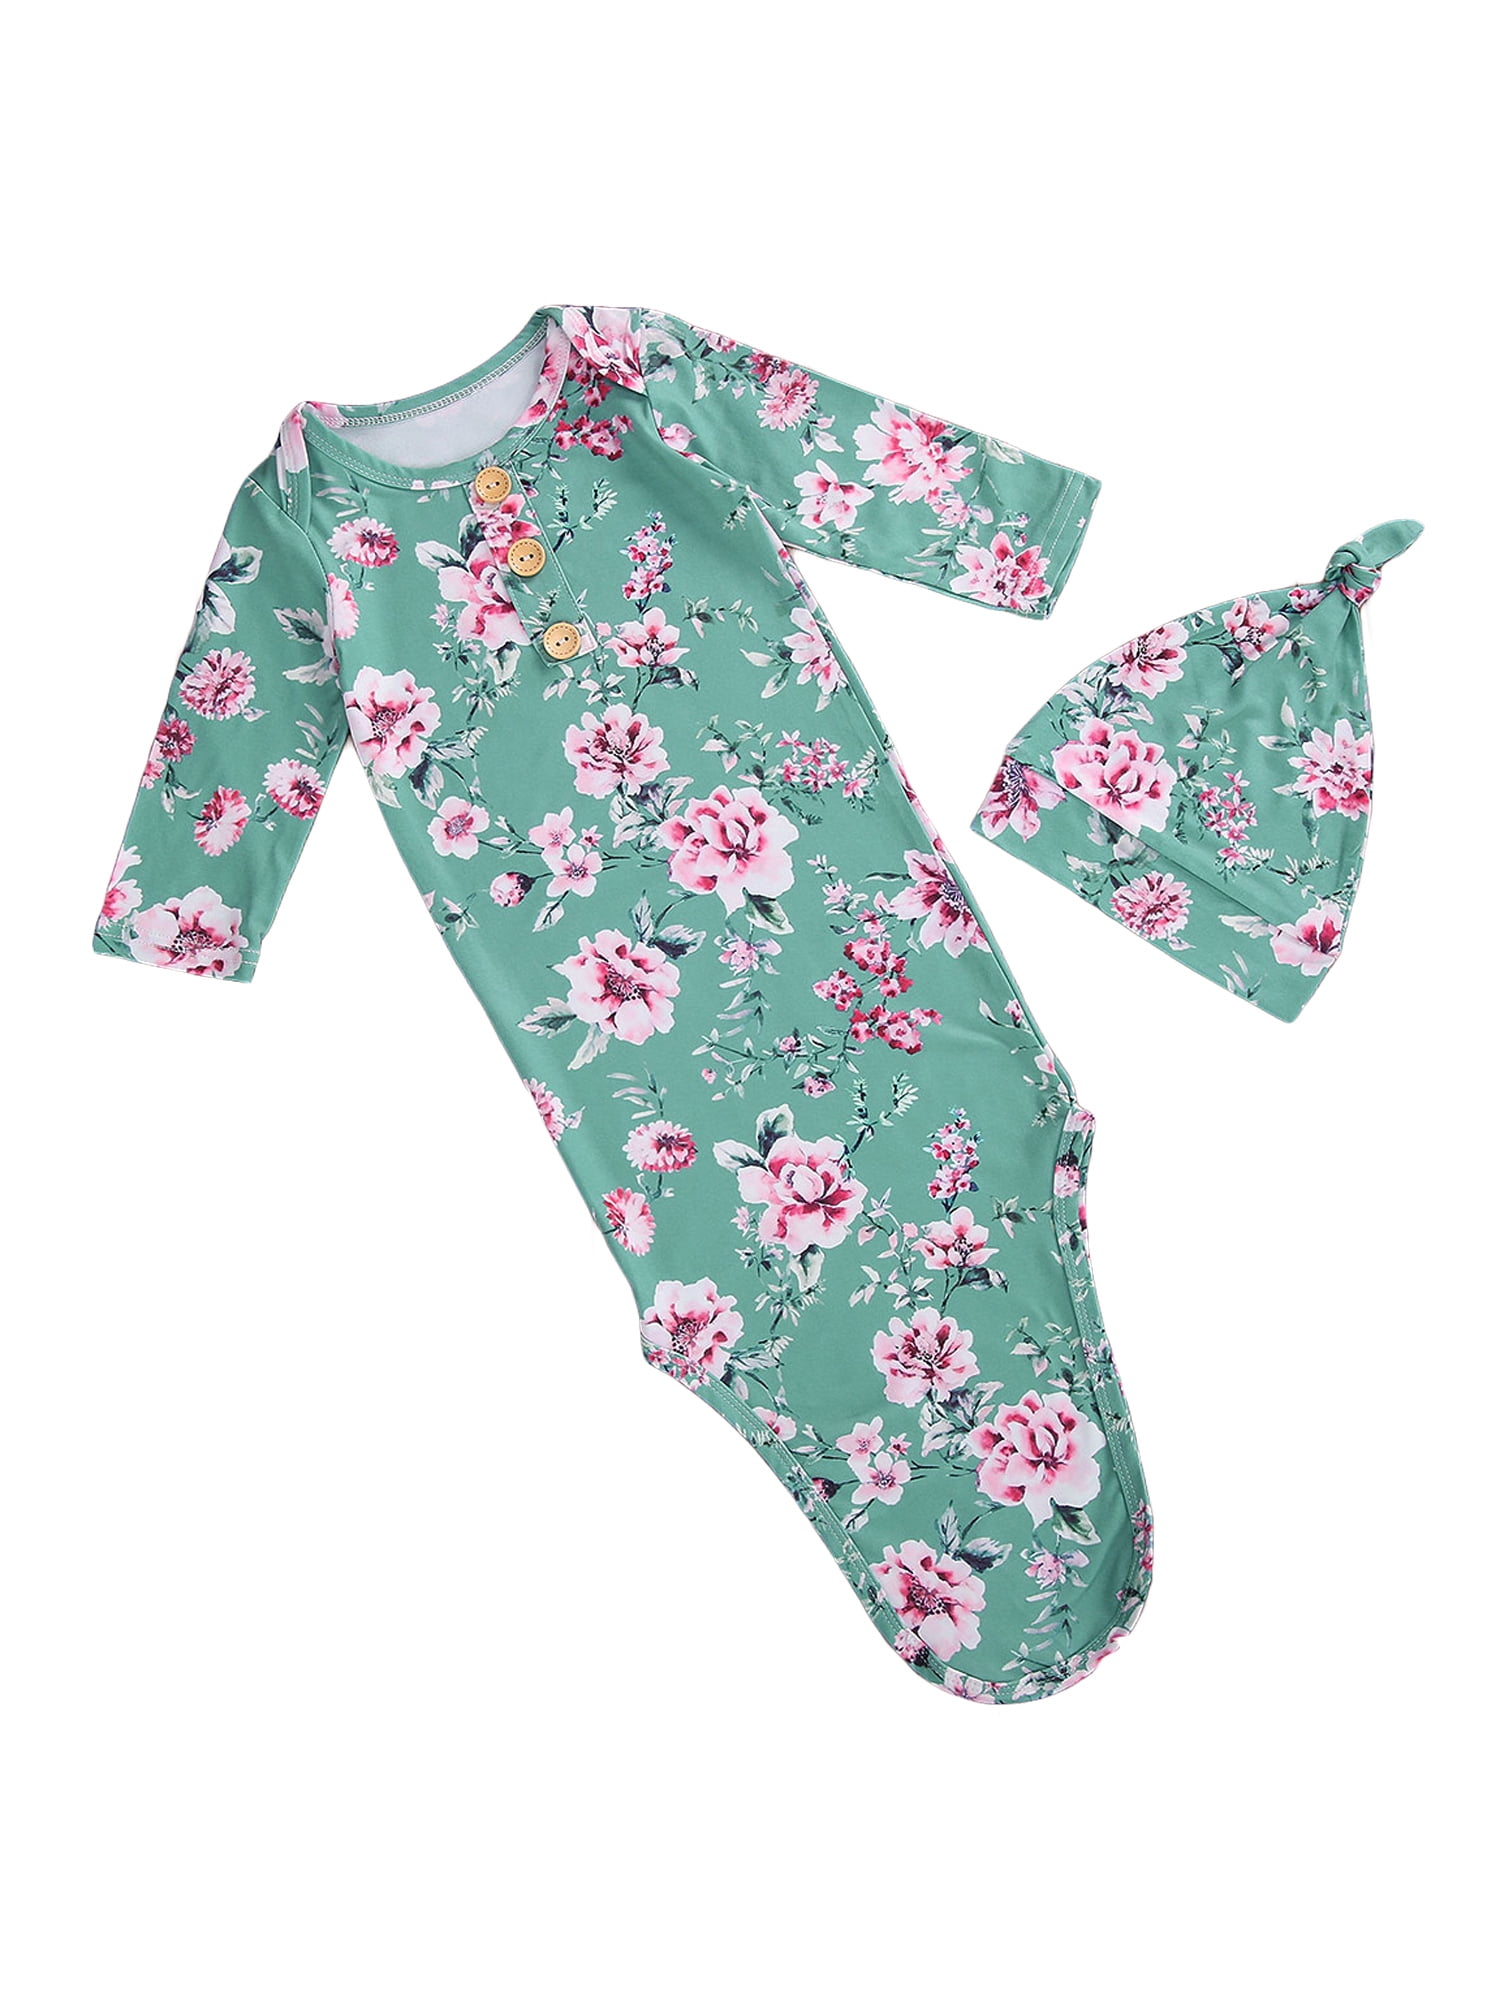 Newborn Infant Baby Girl Boy Gowns Sleeping Bag Pajamas Coming Home Outfits Swaddle Blanket Cotton Nightgown Sleepwear